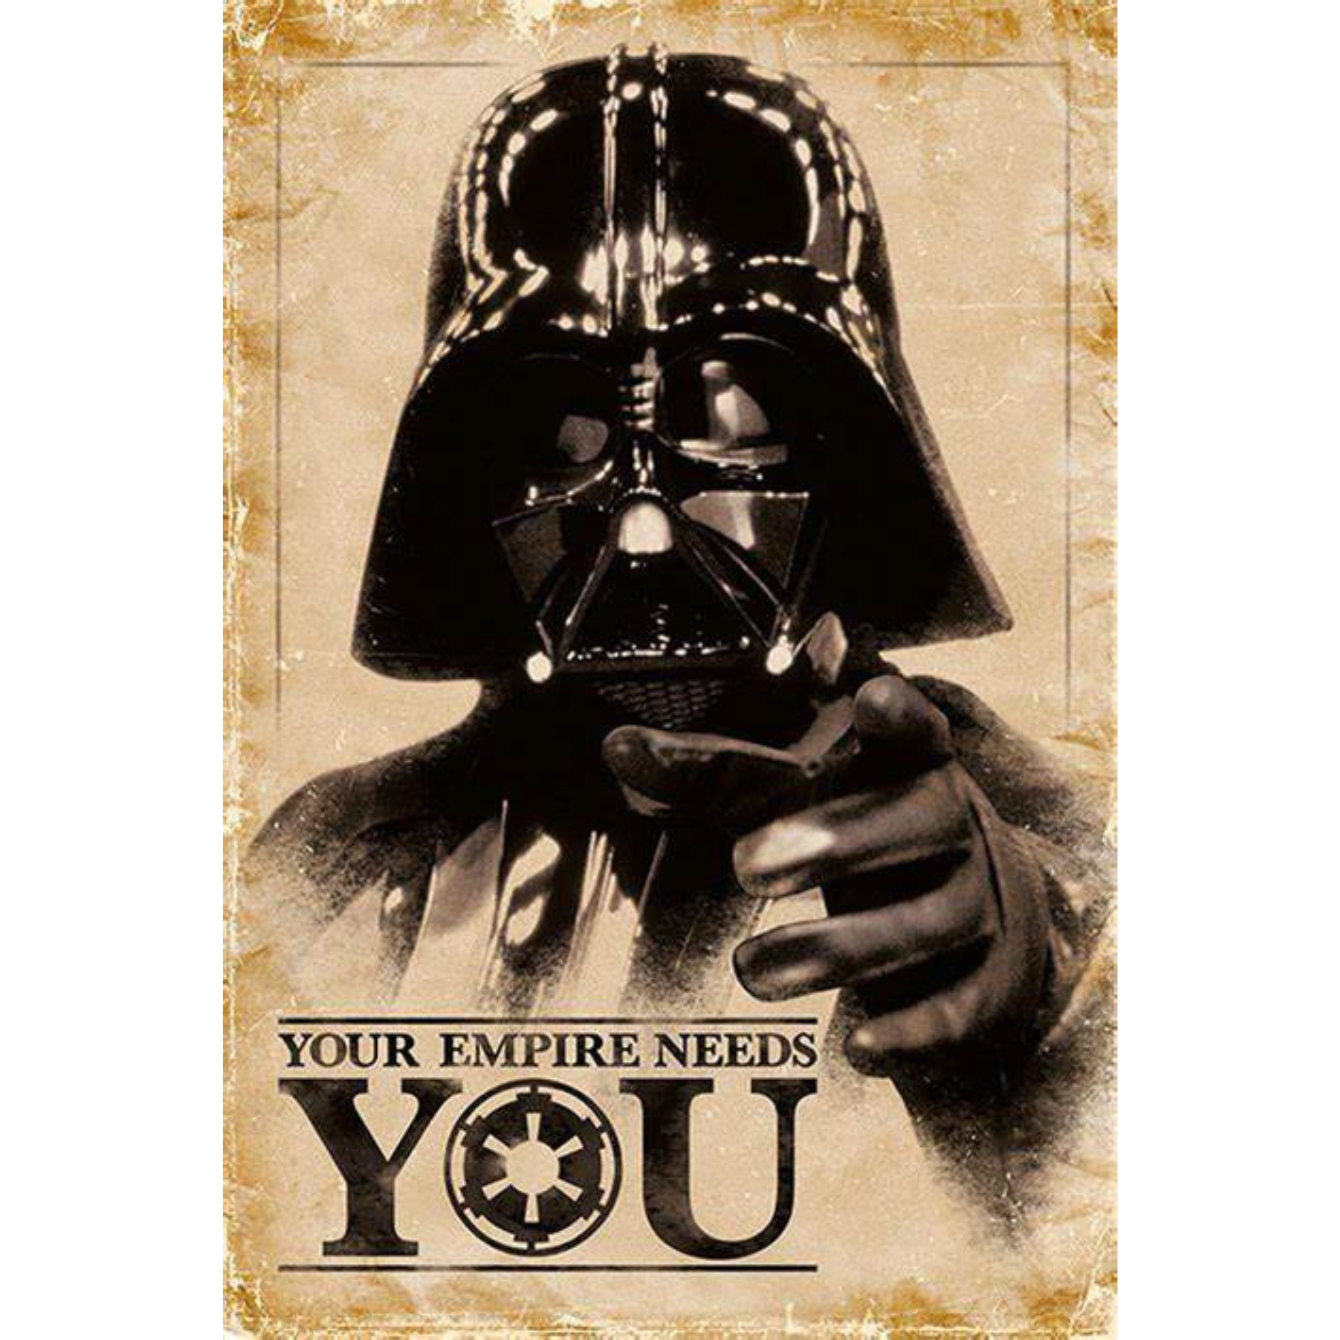 Darth Vader 'The Empire Needs You' Poster